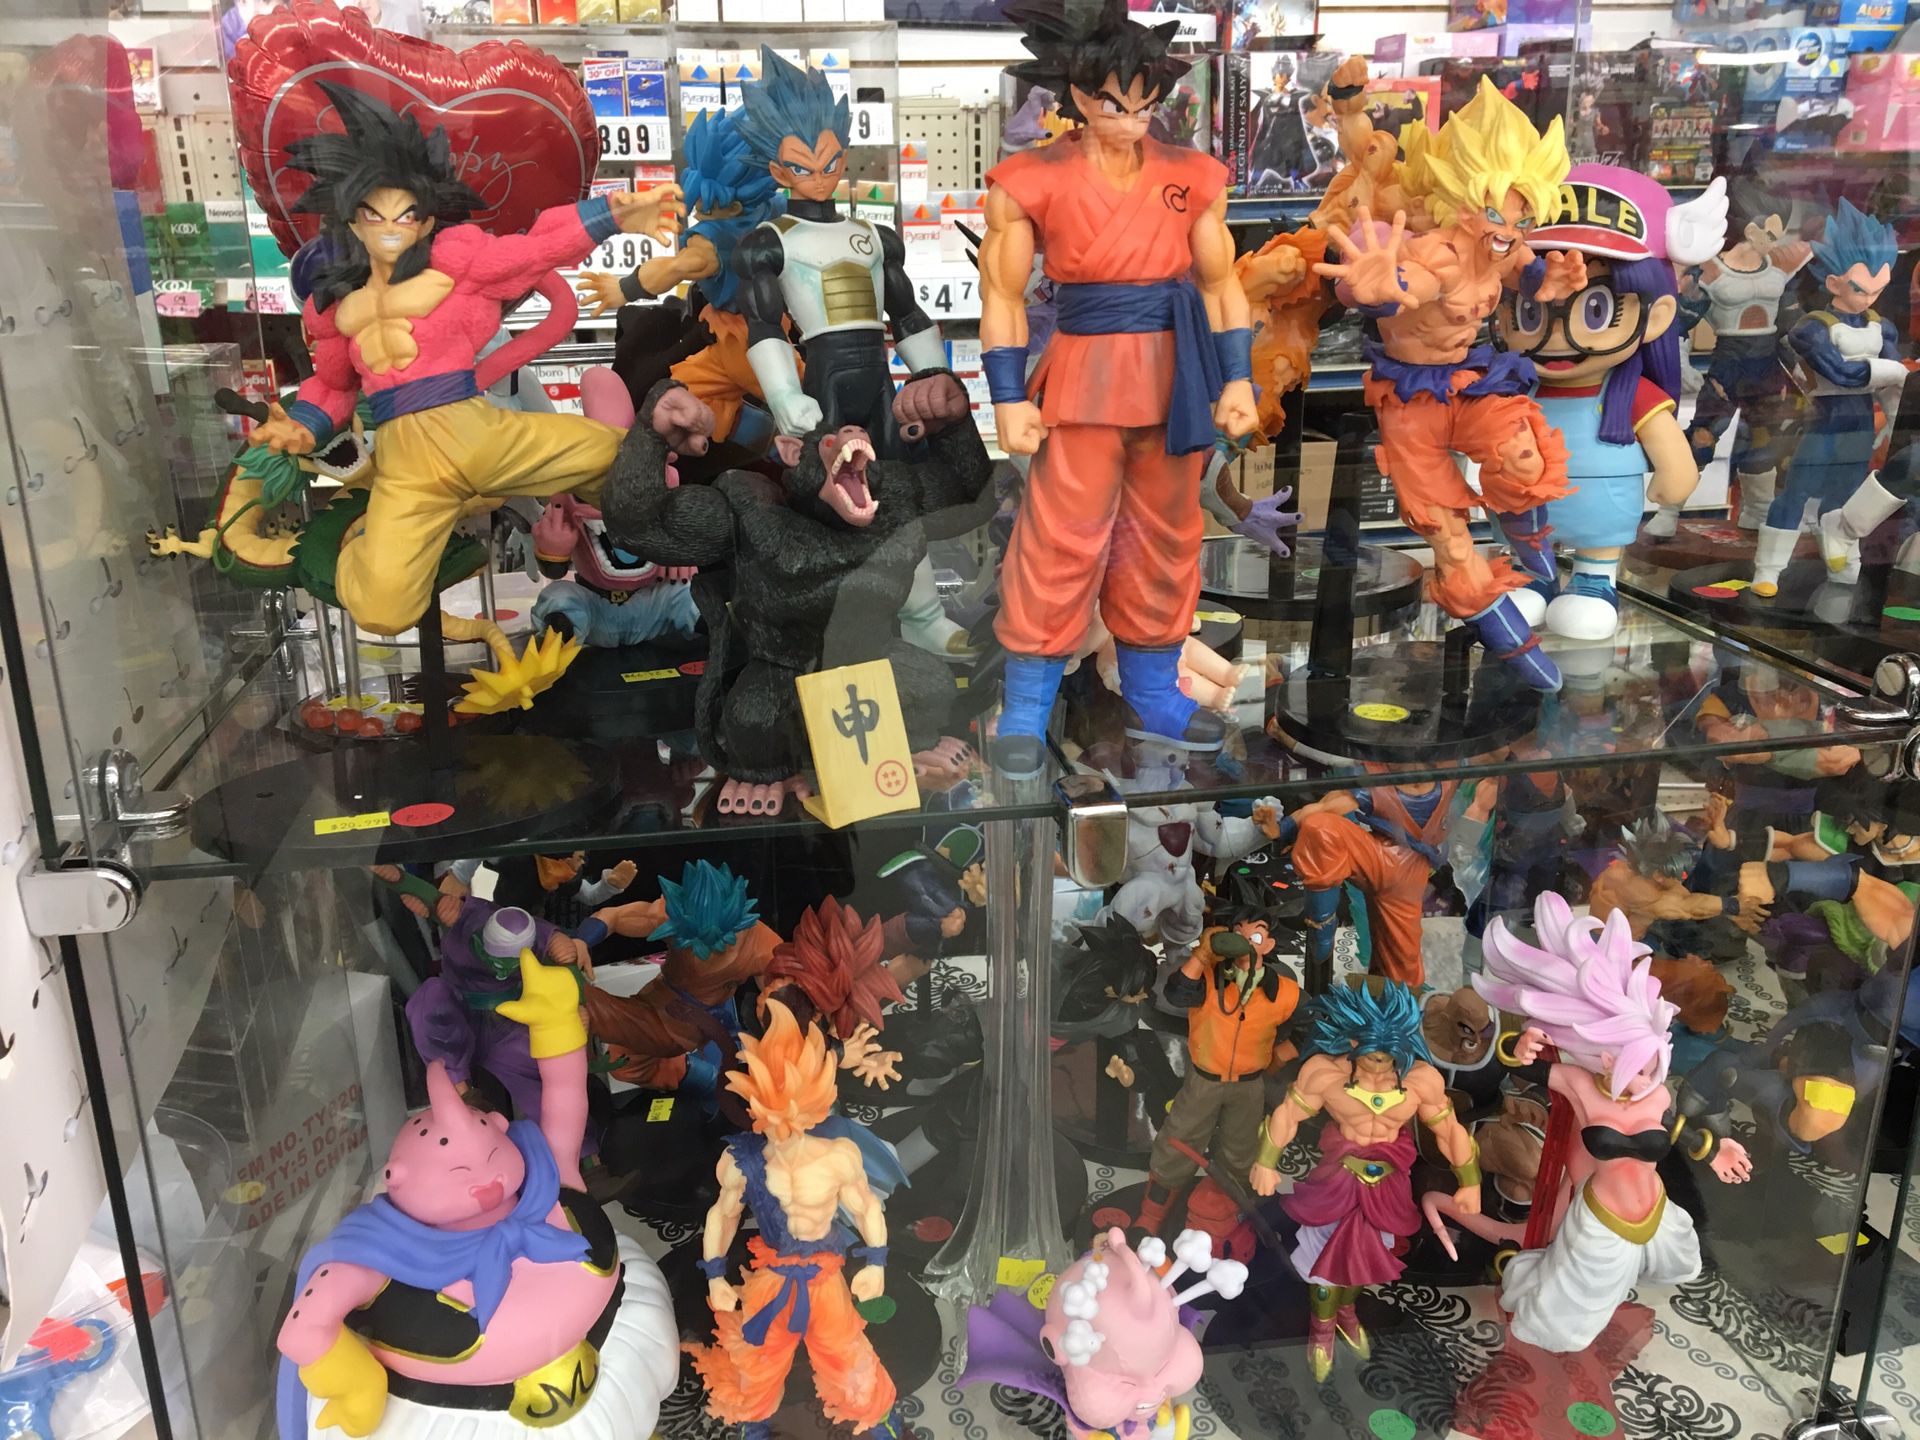 Dragon Ball Z (DBZ) Collectible Figurines (Ask Price)